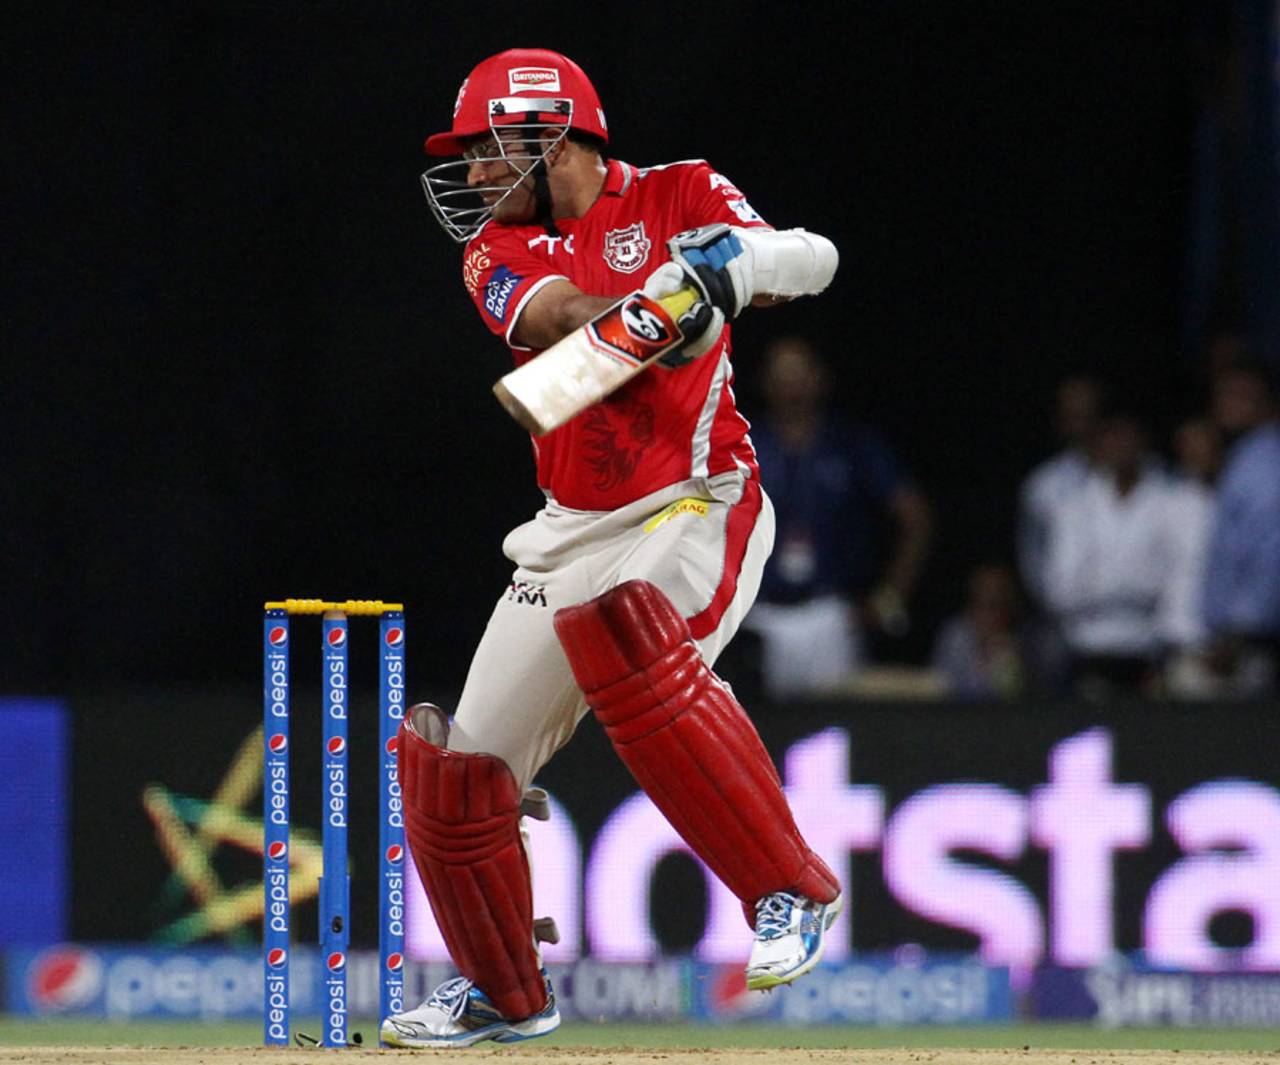 Virender Sehwag got Kings XI Punjab to a flier after being put in by Mumbai Indians at the Wankhede Stadium&nbsp;&nbsp;&bull;&nbsp;&nbsp;BCCI